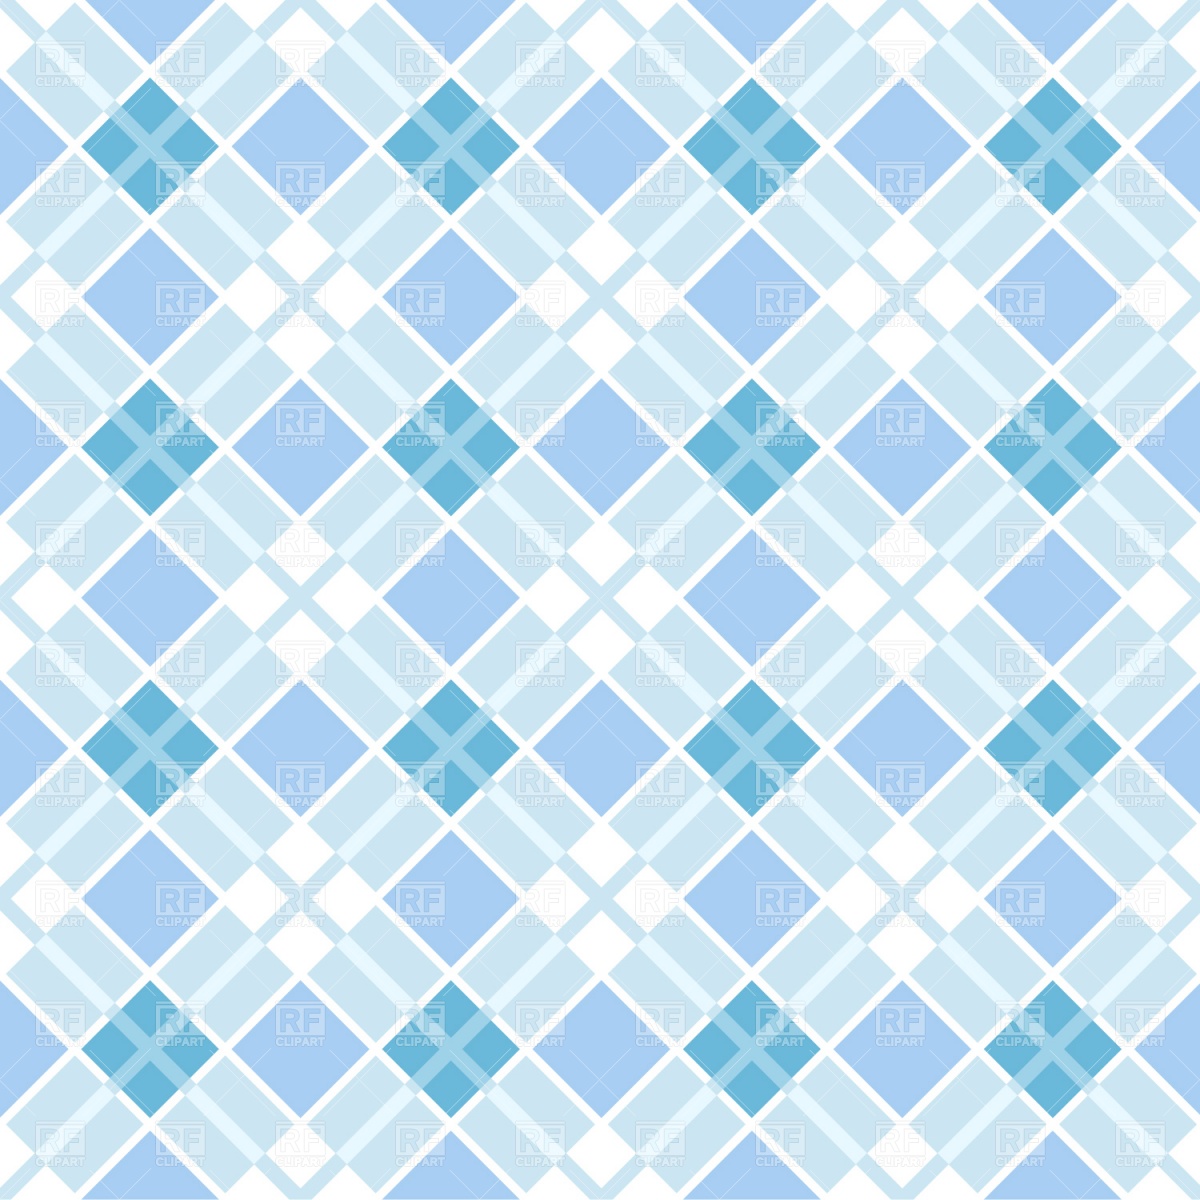 Free Plaid Background Cliparts, Download Free Plaid Background Cliparts